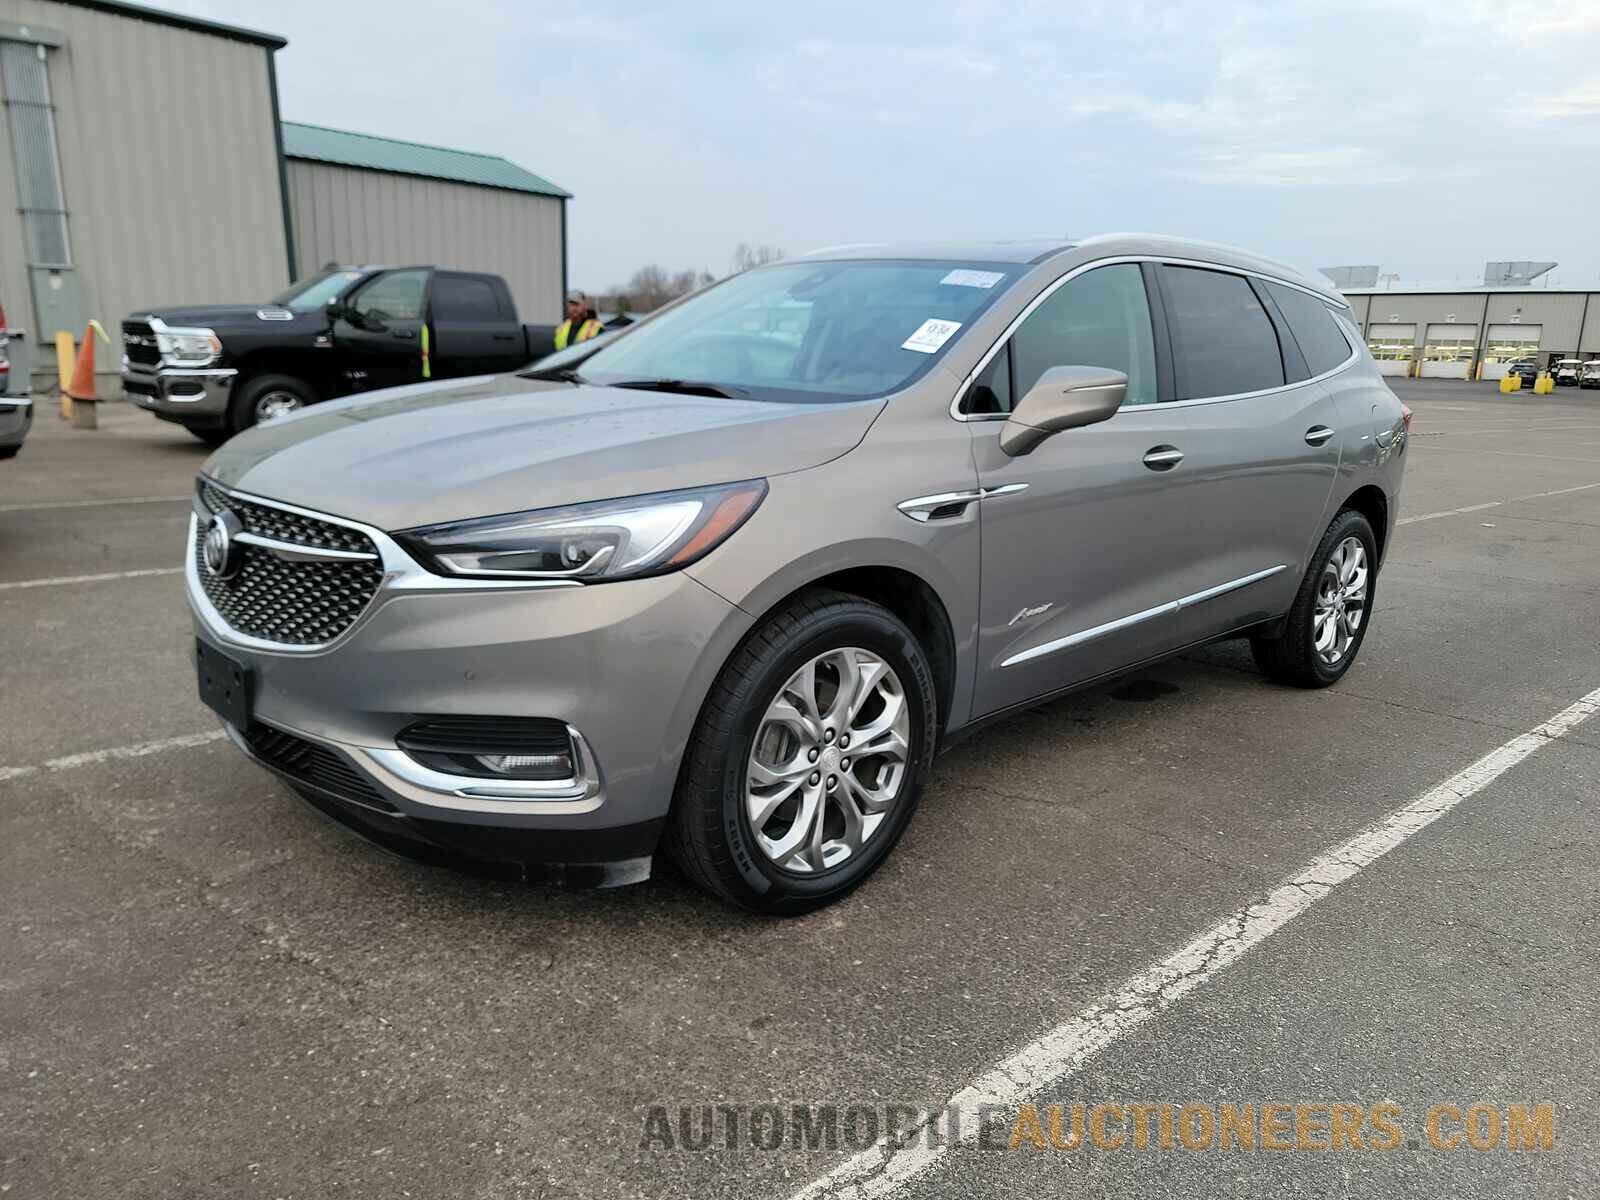 5GAEVCKW6JJ199403 Buick Enclave 2018